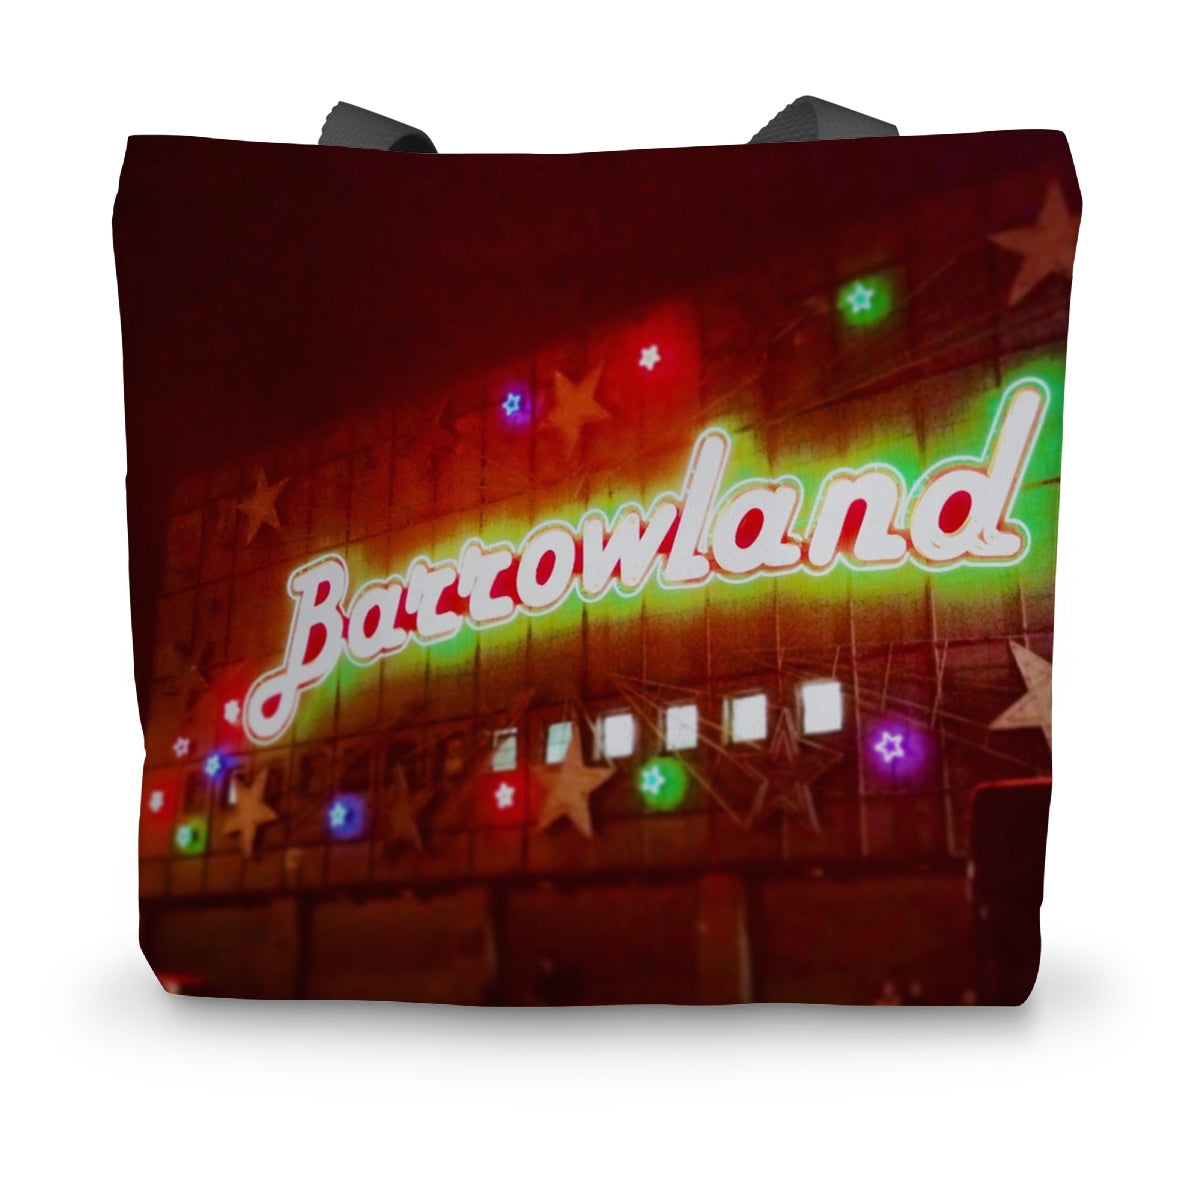 A Neon Glasgow Barrowlands Art Gifts Canvas Tote Bag-Bags-Edinburgh & Glasgow Art Gallery-14"x18.5"-Paintings, Prints, Homeware, Art Gifts From Scotland By Scottish Artist Kevin Hunter